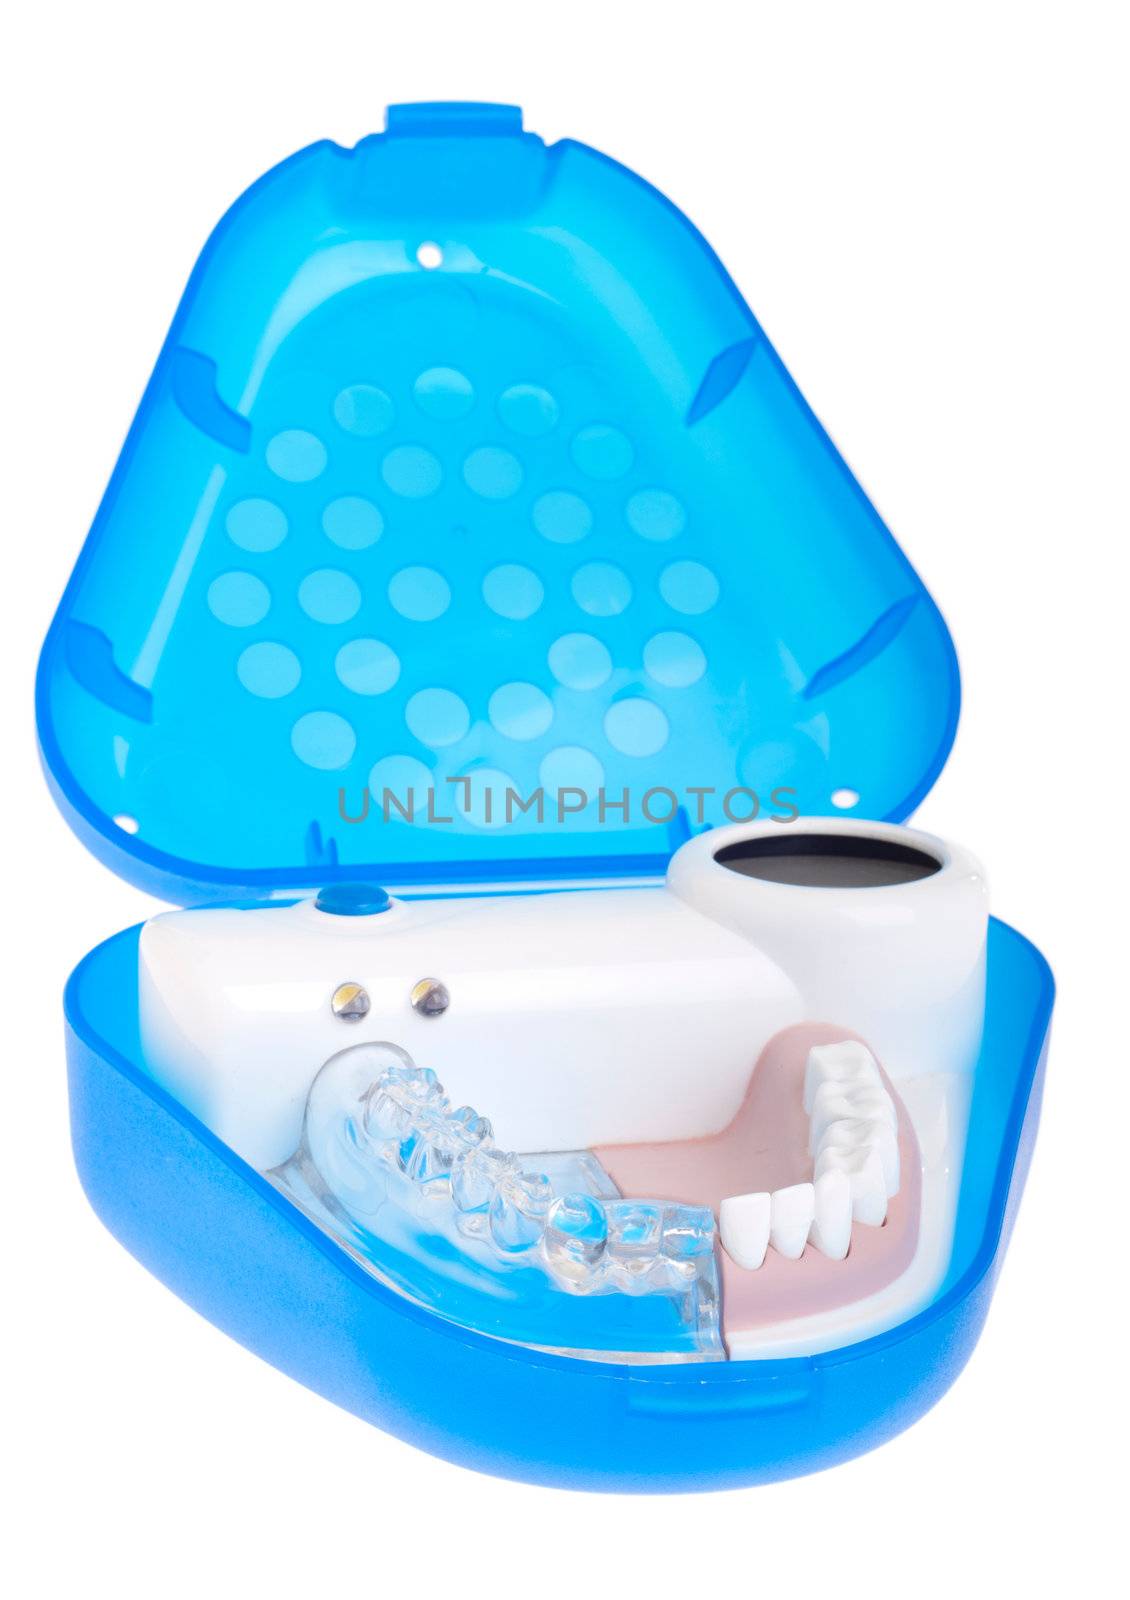 portable dental model case for checking intra proximal problems (isolated on white background)